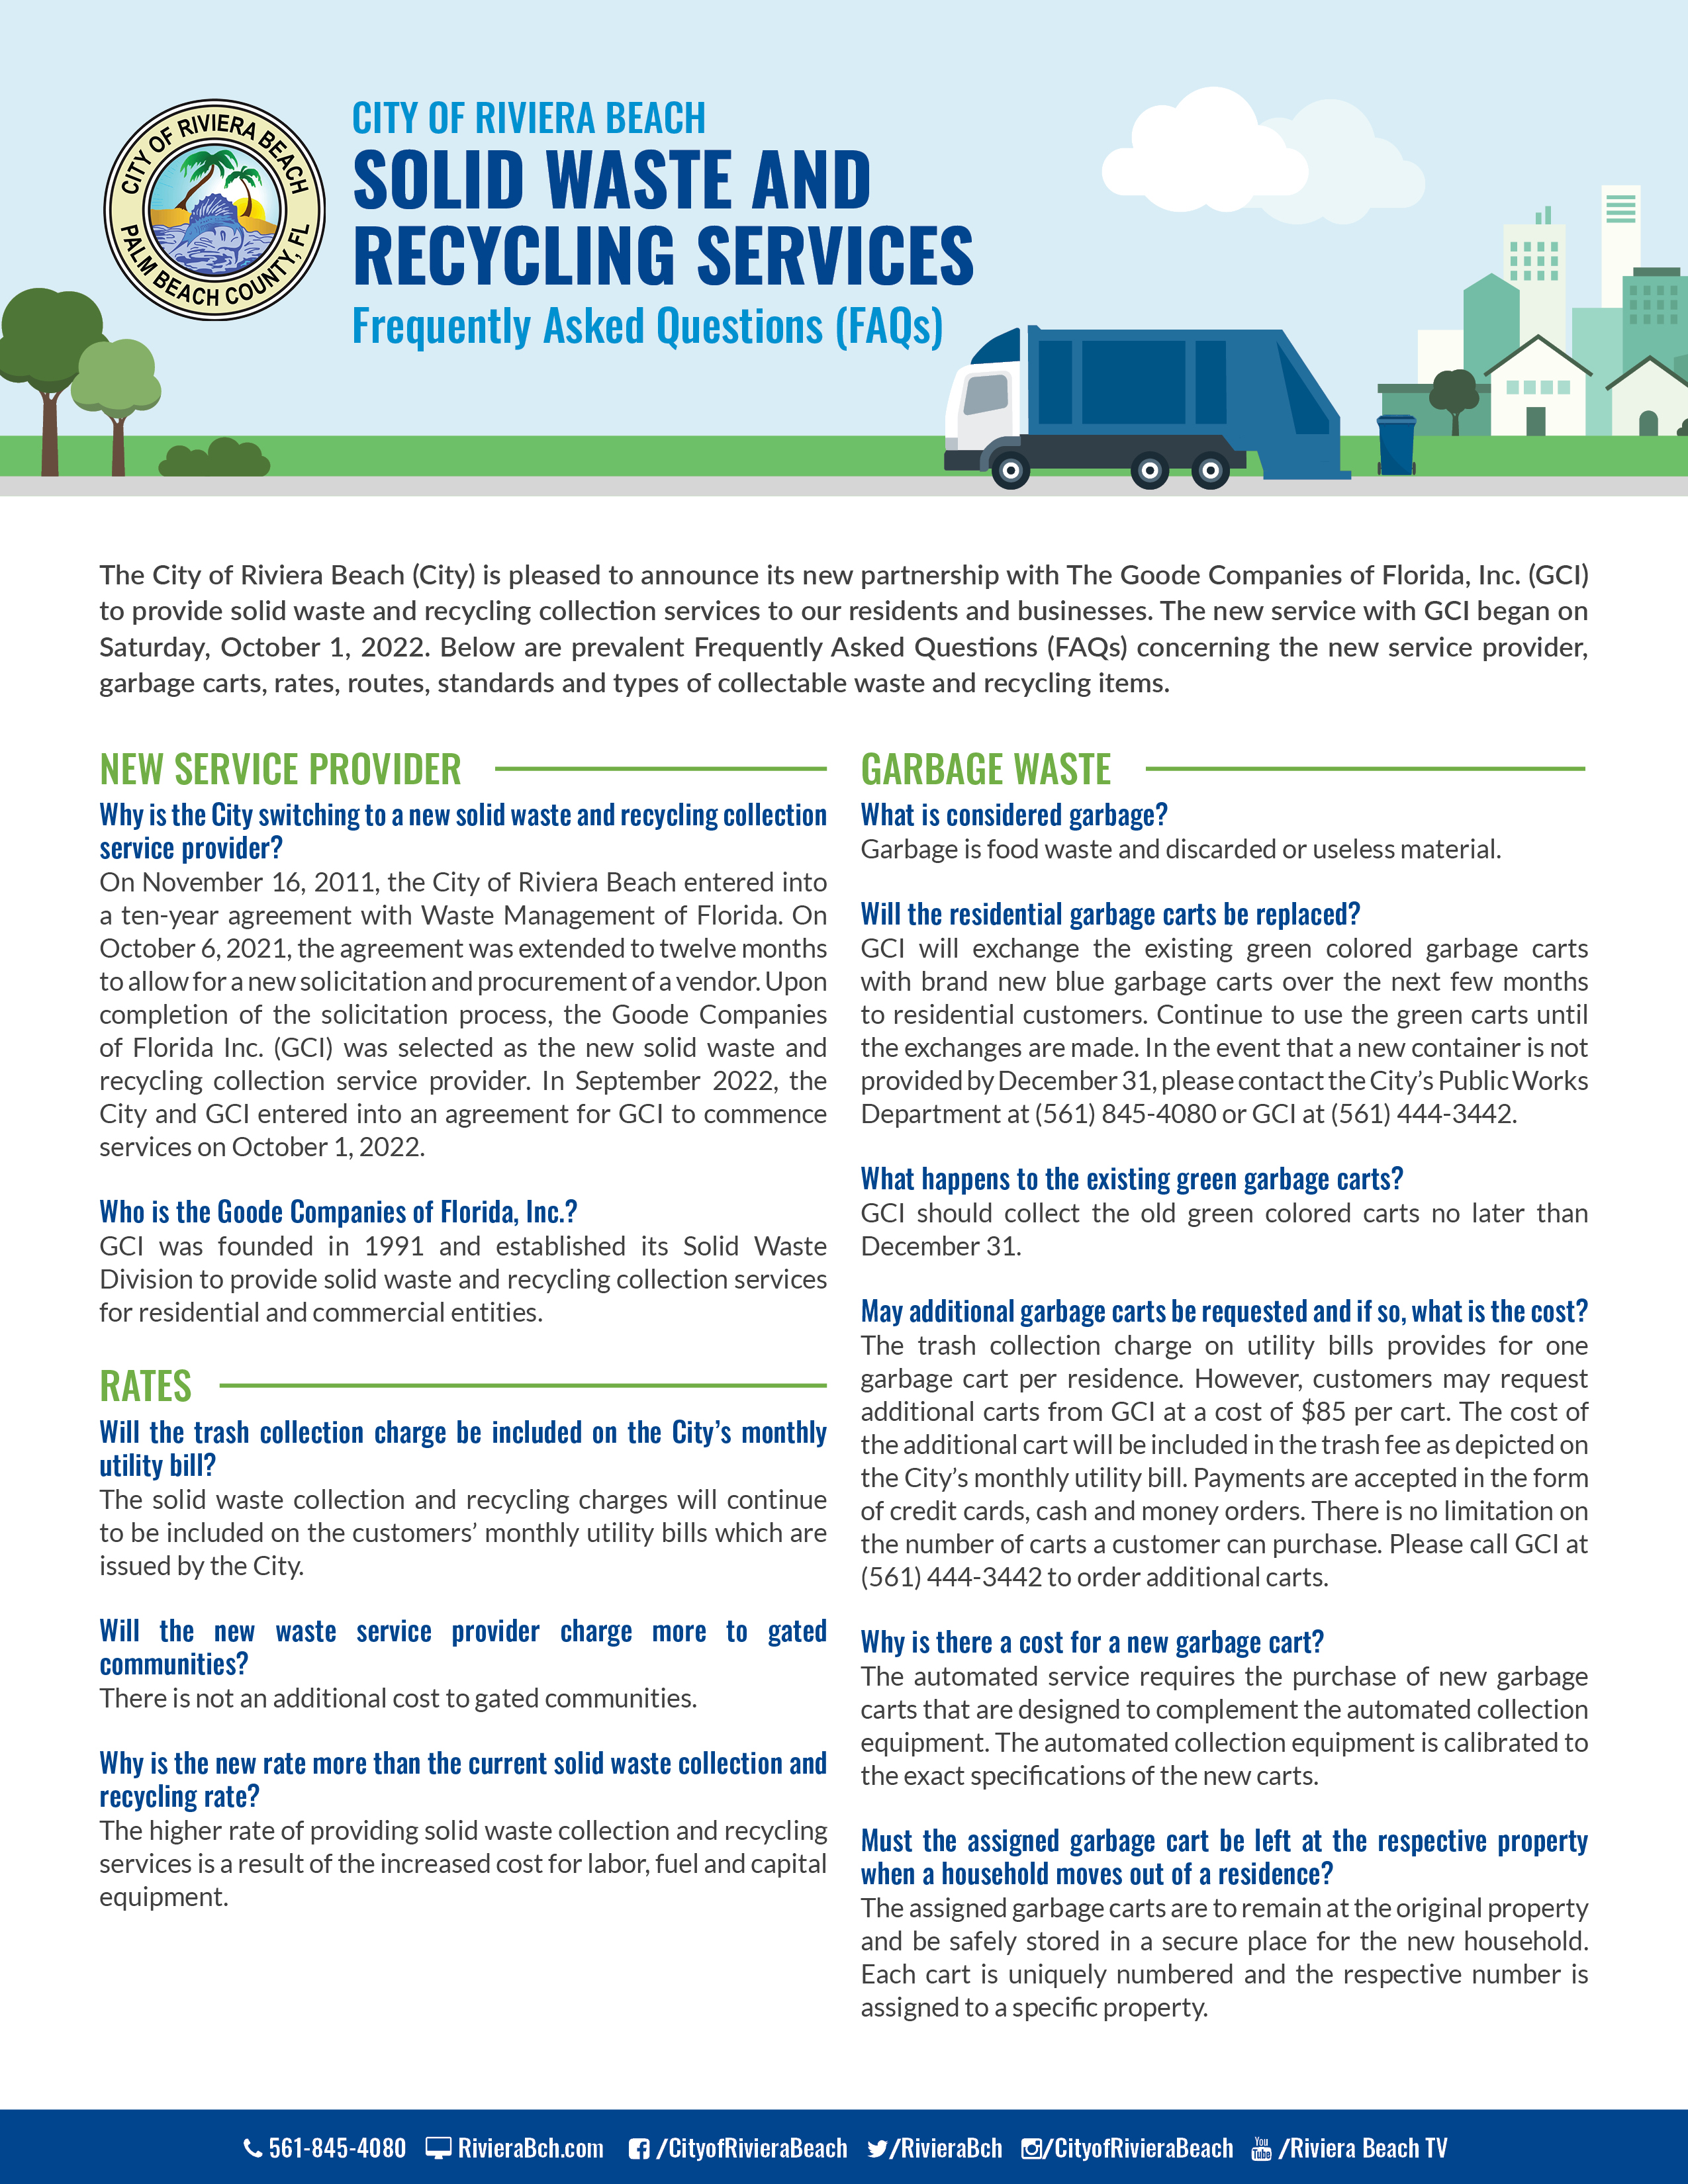 City of Riviera Beach Solid Waste and Recycling Collection Services  Frequently Asked Questions (FAQs)  The City of Riviera Beach (City) is pleased to announce its new partnership with The Goode Companies of Florida, Inc. (GCI) to provide solid waste and recycling collection services to our residents and businesses. The new service with GCI began on Saturday, October 1, 2022. Below are prevalent Frequently Asked Questions (FAQs) concerning the new service provider, garbage carts, rates, routes, standards and types of collectable waste and recycling items.   New Service Provider  Why is the City switching to a new solid waste and recycling collection service provider?    On November 16, 2011, the City of Riviera Beach entered into a ten-year agreement with Waste Management of Florida. On October 6, 2021, the agreement was extended to twelve months to allow for a new solicitation and procurement of a vendor. Upon completion of the solicitation process, the Goode Companies of Florida Inc. (GCI) was selected as the new solid waste and recycling collection service provider. In September 2022, the City and GCI entered into an agreement for GCI to commence services on October 1, 2022.     Who is the Goode Companies of Florida, Inc.?  GCI was founded in 1991 and established its Solid Waste Division to provide solid waste and recycling collection services for residential and commercial entities.   Rates  Will the trash collection charge be included on the City’s monthly utility bill? The solid waste collection and recycling charges will continue to be included on the customers’ monthly utility bills which are issued by the City.  Will the new waste service provider charge more to gated communities?  There is not an additional cost to gated communities.     Why is the new rate more than the current solid waste collection and recycling rate?   The higher rate of providing solid waste collection and recycling services is a result of the increased cost for labor, fuel and capital equipment.    Garbage Waste  What is considered garbage? Garbage is food waste and discarded or useless material.  Will the residential garbage carts be replaced? GCI will exchange the existing green colored garbage carts with brand new blue garbage carts over the next few months to residential customers. Continue to use the green carts until the exchanges are made. In the event that a new container is not provided by December 31, please contact the City's Public Works Department at (561) 845-4080 or GCI at (561) 444-3442.   What happens to the existing green garbage carts?   GCI should collect the old green colored carts no later than December 31.    May additional garbage carts be requested and if so, what is the cost?  The trash collection charge on utility bills provides for one garbage cart per residence. However, customers may request additional carts from GCI at a cost of $85 per cart. The cost of the additional cart will be included in the trash fee as depicted on the City’s monthly utility bill. Payments are accepted in the form of credit cards and money orders.  There is no limitation on the number of carts a customer can purchase. Please call GCI at (561) 444-3442 to order additional carts.  Why is there a cost for a new garbage cart?   The automated service requires the purchase of new garbage carts that are designed to complement the automated collection equipment. The automated collection equipment is calibrated to the exact specifications of the new carts.   Must the assigned garbage cart be left at the respective property when a household moves out of a residence?  The assigned garbage carts are to remain at the original property and be safely stored in a secure place for the new household.  Each cart is uniquely numbered and the respective number is assigned to a specific property.   What if a garbage cart is broken or stolen? If the collection truck causes the damage or if the damage is a result of normal wear, the impaired cart will be replaced or repaired at no cost. Damage resulting from negligence or misuse will be the responsibility of the resident. Stolen carts will be replaced at no charge to the customer.  What are the guidelines for garbage that is considered appropriate for collecting? Garbage waste must be placed inside the garbage cart provided by GCI. Garbage bags and other garbage debris that are placed outside the garbage cart will not be collected.  What time should garbage carts be placed curbside for garbage collection service?   Curbside residential solid waste collection service will be provided between the hours of 6 a.m. and 5 p.m., Monday through Friday, and on Saturdays from 6:00 a.m. to 3:00 p.m. except for holidays. Dwelling units receiving containerized residential solid waste collection service and non residential collection sites located within 150 yards of residential uses will only be collected between the hours of 7 a.m. and 5 p.m., Monday through Saturday. Other non-residential locations may be collected at any time. The hours of collection may be extended due to extraordinary circumstances or conditions.  Where must garbage carts be placed for collection service? Proper placement of carts is curbside at a safe distance of at least 4 to 6 feet away from any plantings, fencing, mailboxes or vehicles, with the front of the cart facing the street.   How often will garbage be collected? Curbside residential garbage collection service will remain at two days per week. Yard and bulk waste, and recyclables will be collected once per week on one of the two scheduled collection days.   Will garbage collection routes change? Presently, routes will remain the same. If routes are changed, new route information will be provided with advance notice.  Any new route changes will be effective after November 30.    Recycling Waste   What is the collection schedule for recycling? The current recycling collection schedule will remain the same.  This means that curbside recycling collection will be provided once per week on either of the two regularly scheduled garbage collection days.  Any schedule change(s) to this particular service will not take effect until after November 30 and customers will be notified in advance.   Will recycling bins be provided? Please use your current recycling bins. If a household needs more than one recycle bin, please contact GCI at (561) 444-3442 or the Solid Waste Authority at (561) 640-4000 to order additional bins at no charge.   Bulk and Yard Waste and Construction and Demolition Debris (C&D)  How often will bulk and yard waste and construction and demolition debris be collected?  Bulk and yard waste will be collected on one of the two regularly scheduled garbage collection days.   What yard waste collection services does GCI provide? Yard waste includes leaves, tree and hedge trimmings, palm fronds and tree limbs. Loose leaves and grass clippings must be placed in a bag. Larger yard waste such as tree limbs must be placed neatly by the curb. Any schedule change(s) to yard waste collection service will be communicated to customers through advance notice.  Any such changes will not take effect until after November 30.  What is the limit for bulk waste and construction and demolition debris (C&D) collection?  Bulk waste and construction and demolition debris (C&D) resulting from minor home maintenance and repair will only be collected at the curbside.  Small pieces of C&D, such as tile or roofing material, will be containerized and weigh no more than 50 pounds per container. Bulk waste does not have a weight limit, but is limited to three bulk items or two cubic yards per service. GCI is not required to collect sections of fencing or debris resulting from the demolition of sheds, storage buildings and other like structures or debris generated by major remodeling/construction projects. GCI or another waste hauler could collect sections of fencing or debris resulting from the demolition of sheds, storage buildings and other like structures or debris generated by major remodeling/construction projects at an additional cost to the customer. To arrange pick up by GCI, please call (561) 444-3442.  How is excessive bulk waste collection scheduled? Bulk waste collection in excess of 6 cubic yards must be scheduled for pick up directly with GCI by contacting them at (561) 444-3442 to request the service.   How much yard waste can be collected on the scheduled waste collection day? Curbside residential yard waste is limited to 6 cubic yards per pick-up. Waste in excess of 6 cubic yards is non-compliant and is subject to charge. The weight limit for yard waste is 50 pounds.  GCI will charge the City for non-compliant bulk and yard waste removal at a cost of $8 per cubic yard for vegetation and $22 per cubic yard for bulk waste. Charges will be invoiced to the City at the end of the month. Residents ultimately will be responsible for noncompliant charges, which will be included on their utility bill from the City.   Hazardous Material  What kind of hazardous waste is unacceptable? Items such as tires, paint and glass are unacceptable for collection and will not be picked up by GCI.   For a list of drop off locations for these items, please visit: https://www.swa.org/172/Drop-Off-Locations.  General  Did the City consider creating its own solid waste collection service?  Establishing a solid waste collection service requires a significant capital investment.    How are missed collections reported?    In the event there is a missed pick up of curbside residential or commercial waste, please use the City’s digital service ticketing system at https://www.rivierabch.com/311/request/add and select the option for missed trash pickup or call the City’s Public Works Department at (561) 845-4080.  How is waste collection provided to persons with disabilities? Services can be arranged for elderly residents and individuals with disabilities that prevent a customer from safely rolling a cart to and from the curb. GCI will collect carts from residents’ garage doors or backdoors and return the carts after service. Please call GCI at (561) 444-3442 to make arrangements.  What happens if the scheduled solid waste collection days fall on a holiday?   Residential collection services are not offered on the following holidays in observance of Thanksgiving, Christmas Day and New Year’s Day.   Collection services will resume on the next scheduled service day.  Customer Service and Relations  City info will be listed  City of Riviera Beach Public Works Department Telephone number: (561) 845-4080 Email: publicworks@rivierabeach.org  Office Hours:  Monday through Friday, 8 a.m. – 5 p.m.  Online: https://www.rivierabch.com/government/public-works Download the Go Riviera App for iOS and Android in the App Store  The Goode Companies of Florida, Inc. (GCI)  Telephone number: (561) 444-3442 Email: rbarea@goodecompanies.com Office Hours:  Monday through Friday, 8 a.m.- 5 p.m. and Saturdays from 9 a.m. – 1 p.m.  Online: www.goodecompanies.com